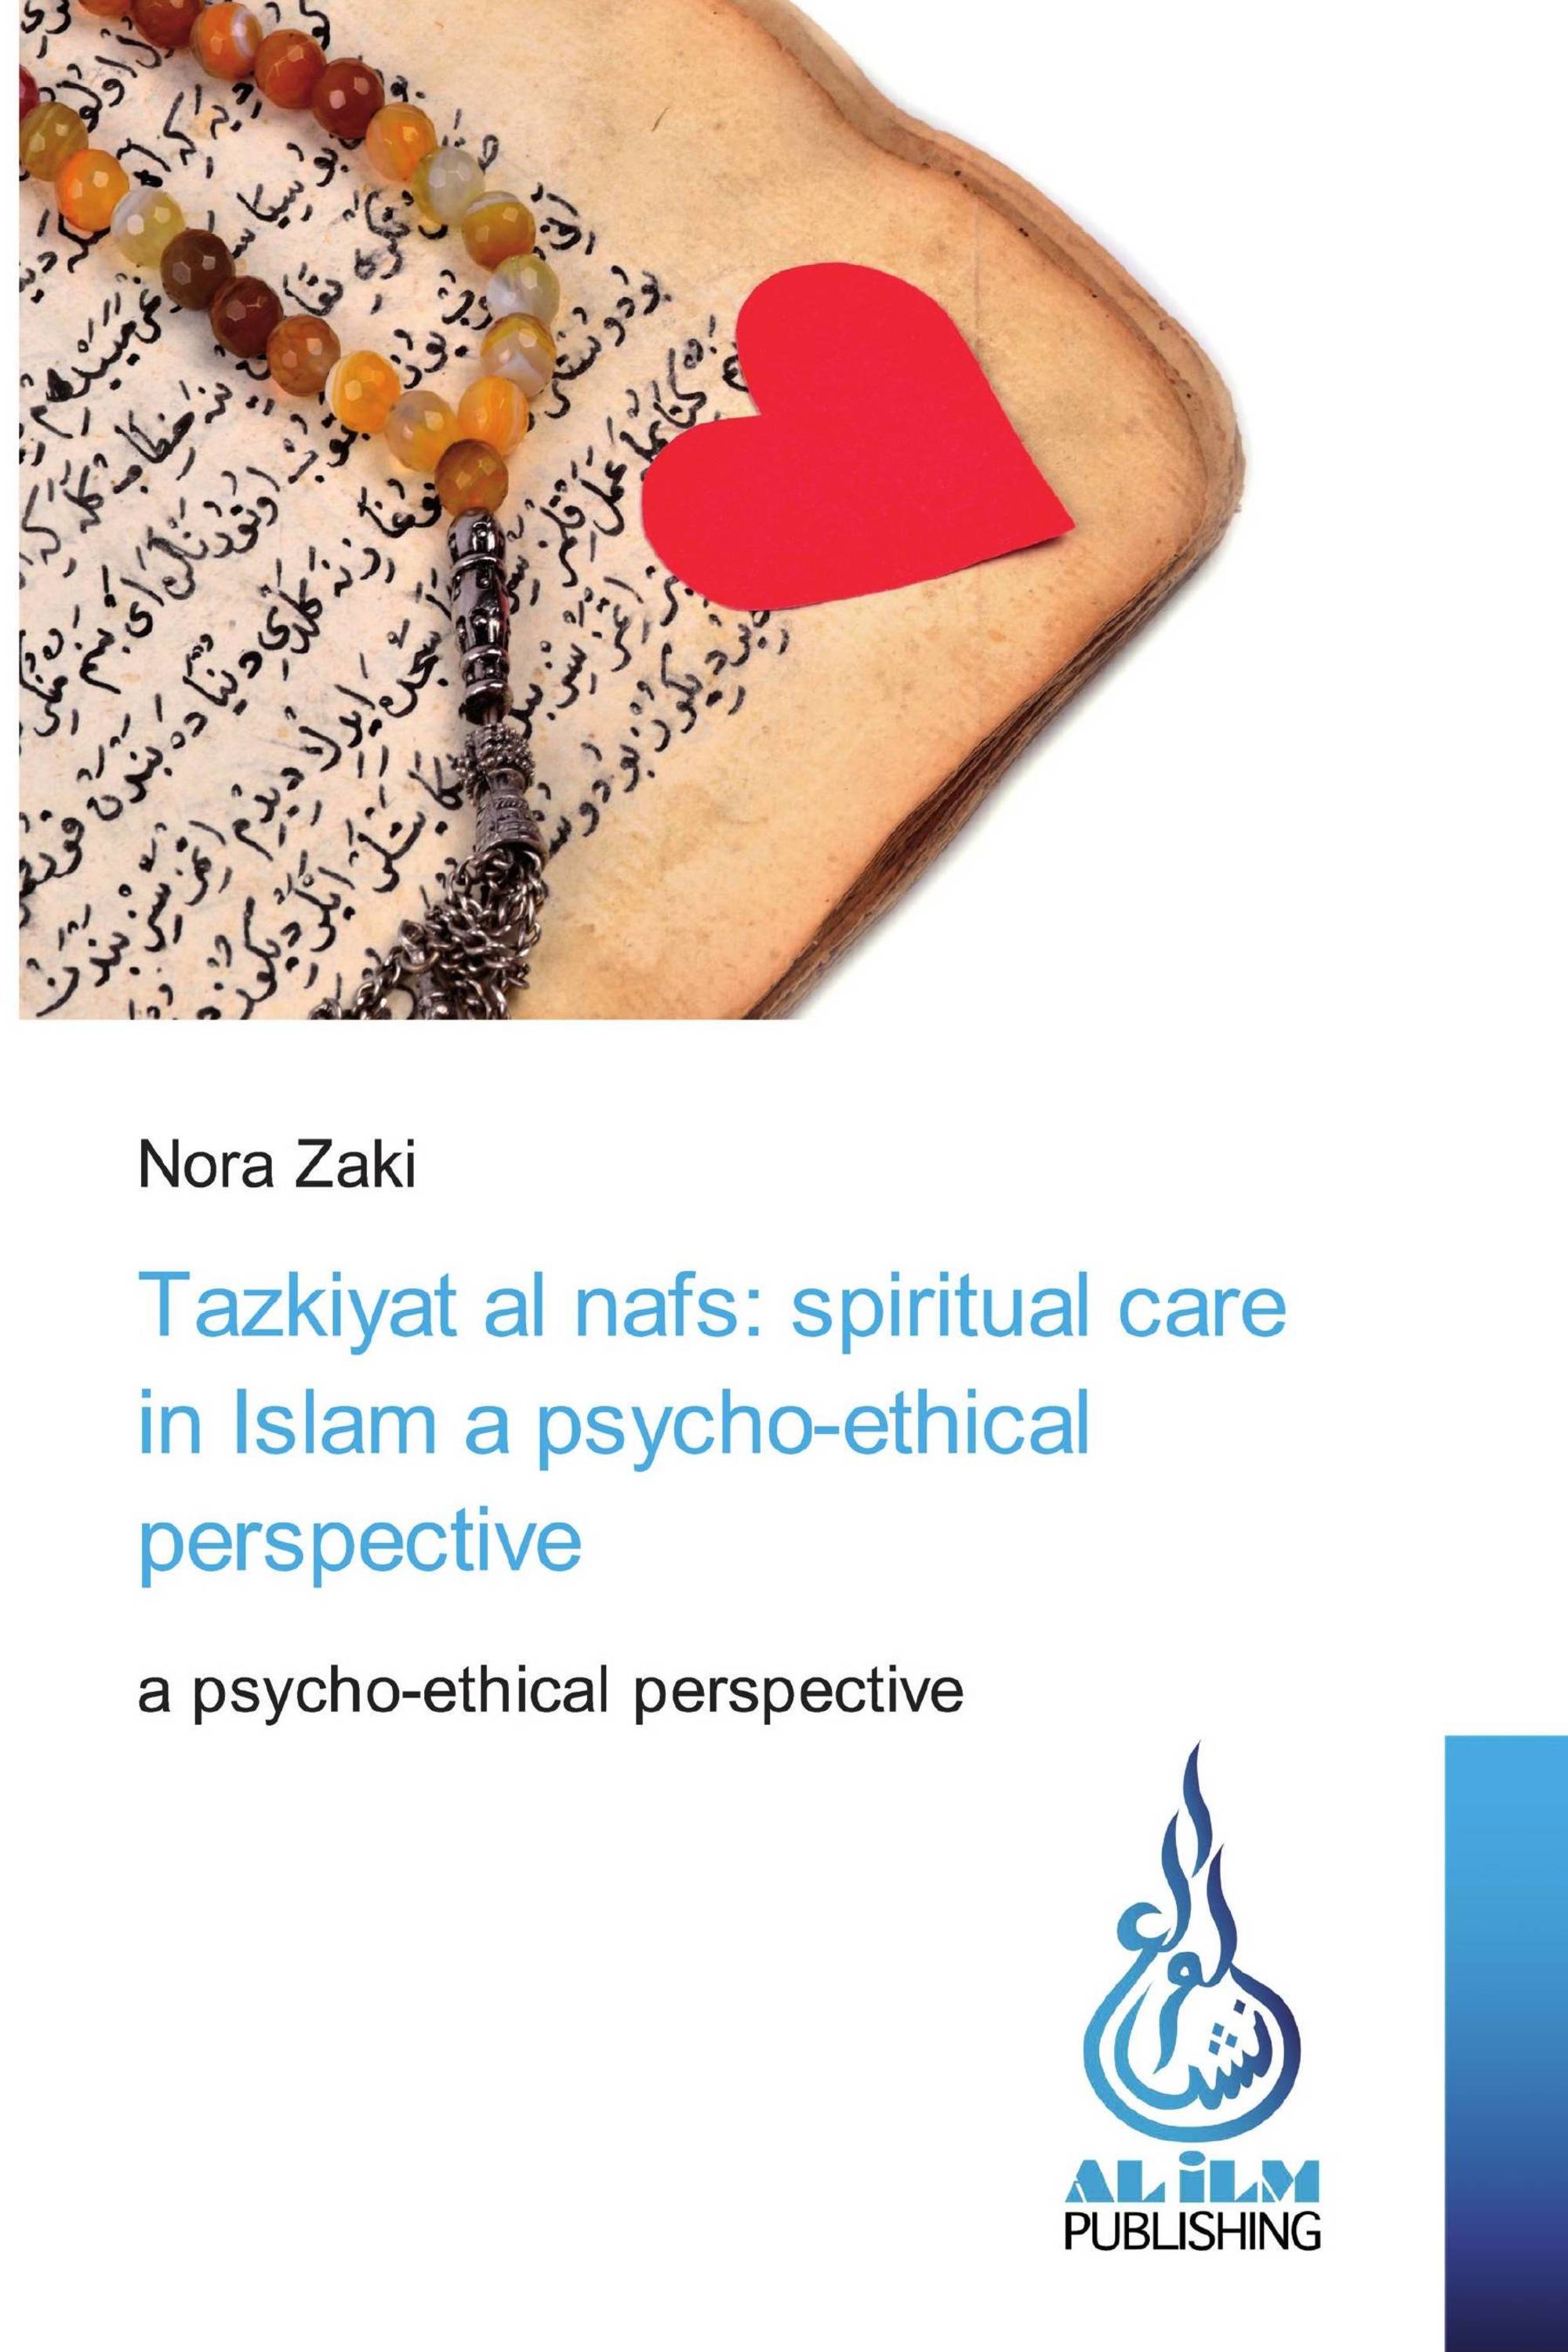 Tazkiyat al nafs: spiritual care in Islam a psycho-ethical perspective